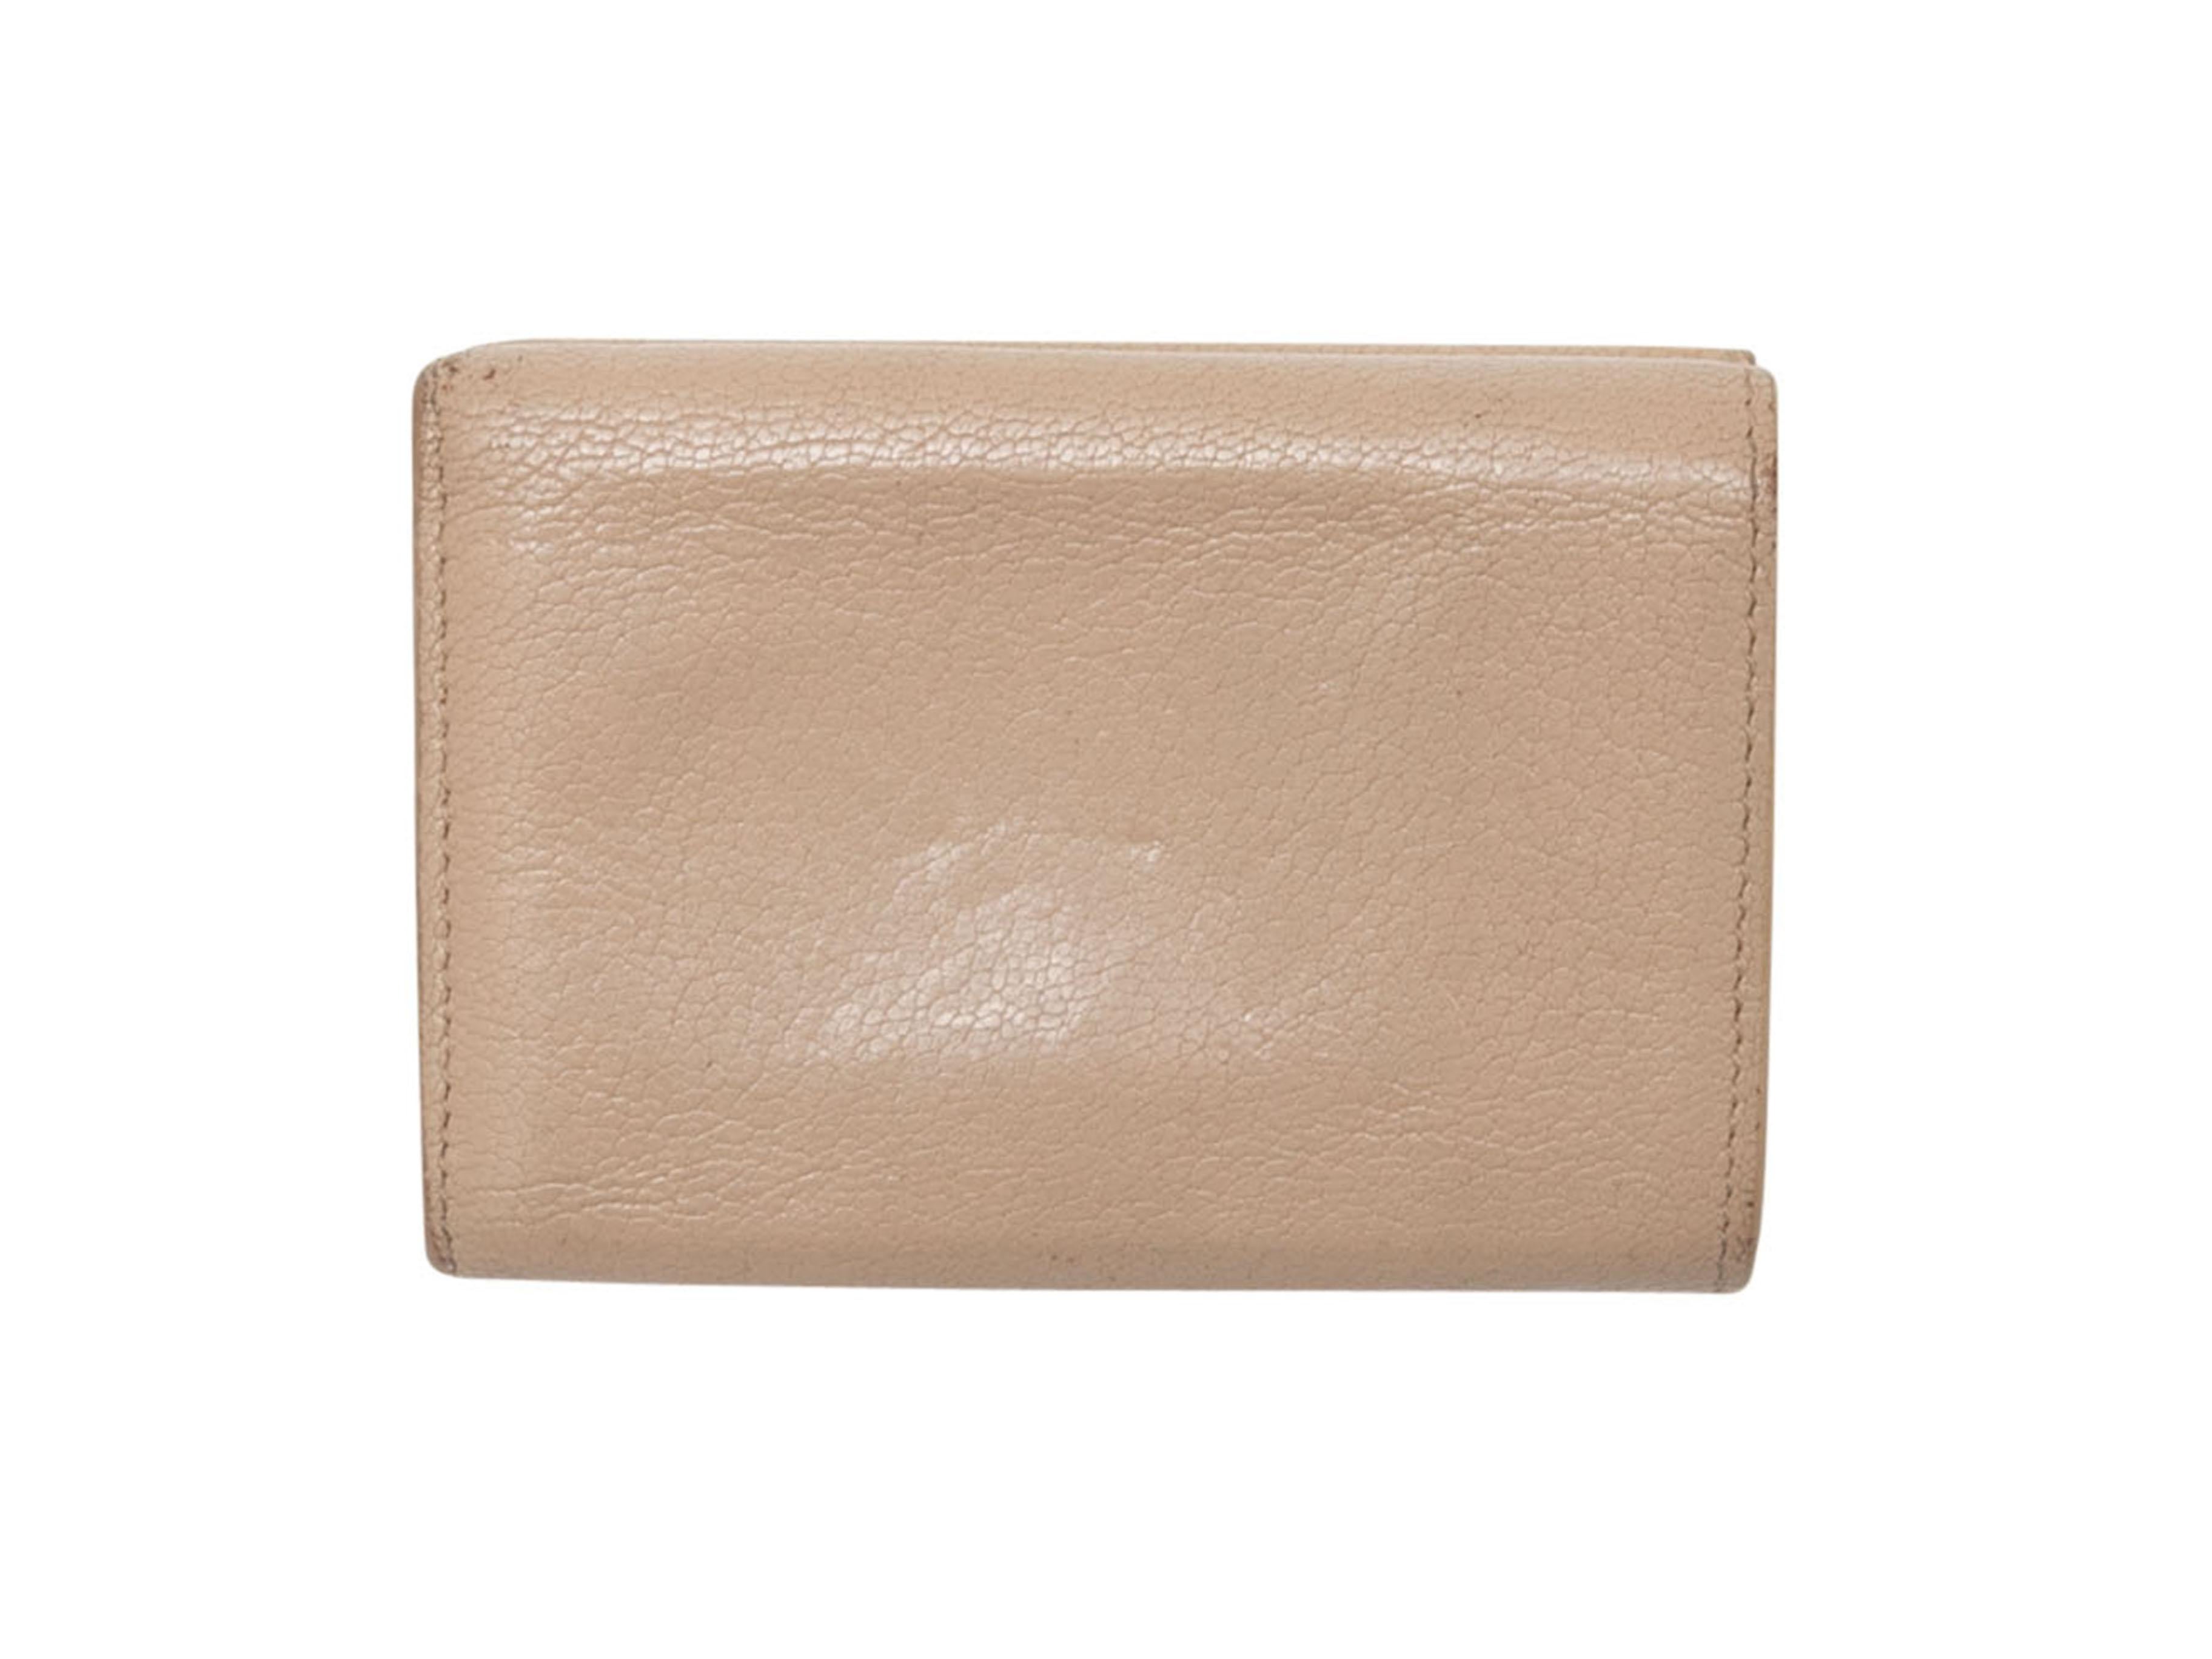 Beige Neo Classic Mini leather wallet by Balenciaga. Gold-tone hardware. Interior card and cash slots. Exterior zip pocket. 3